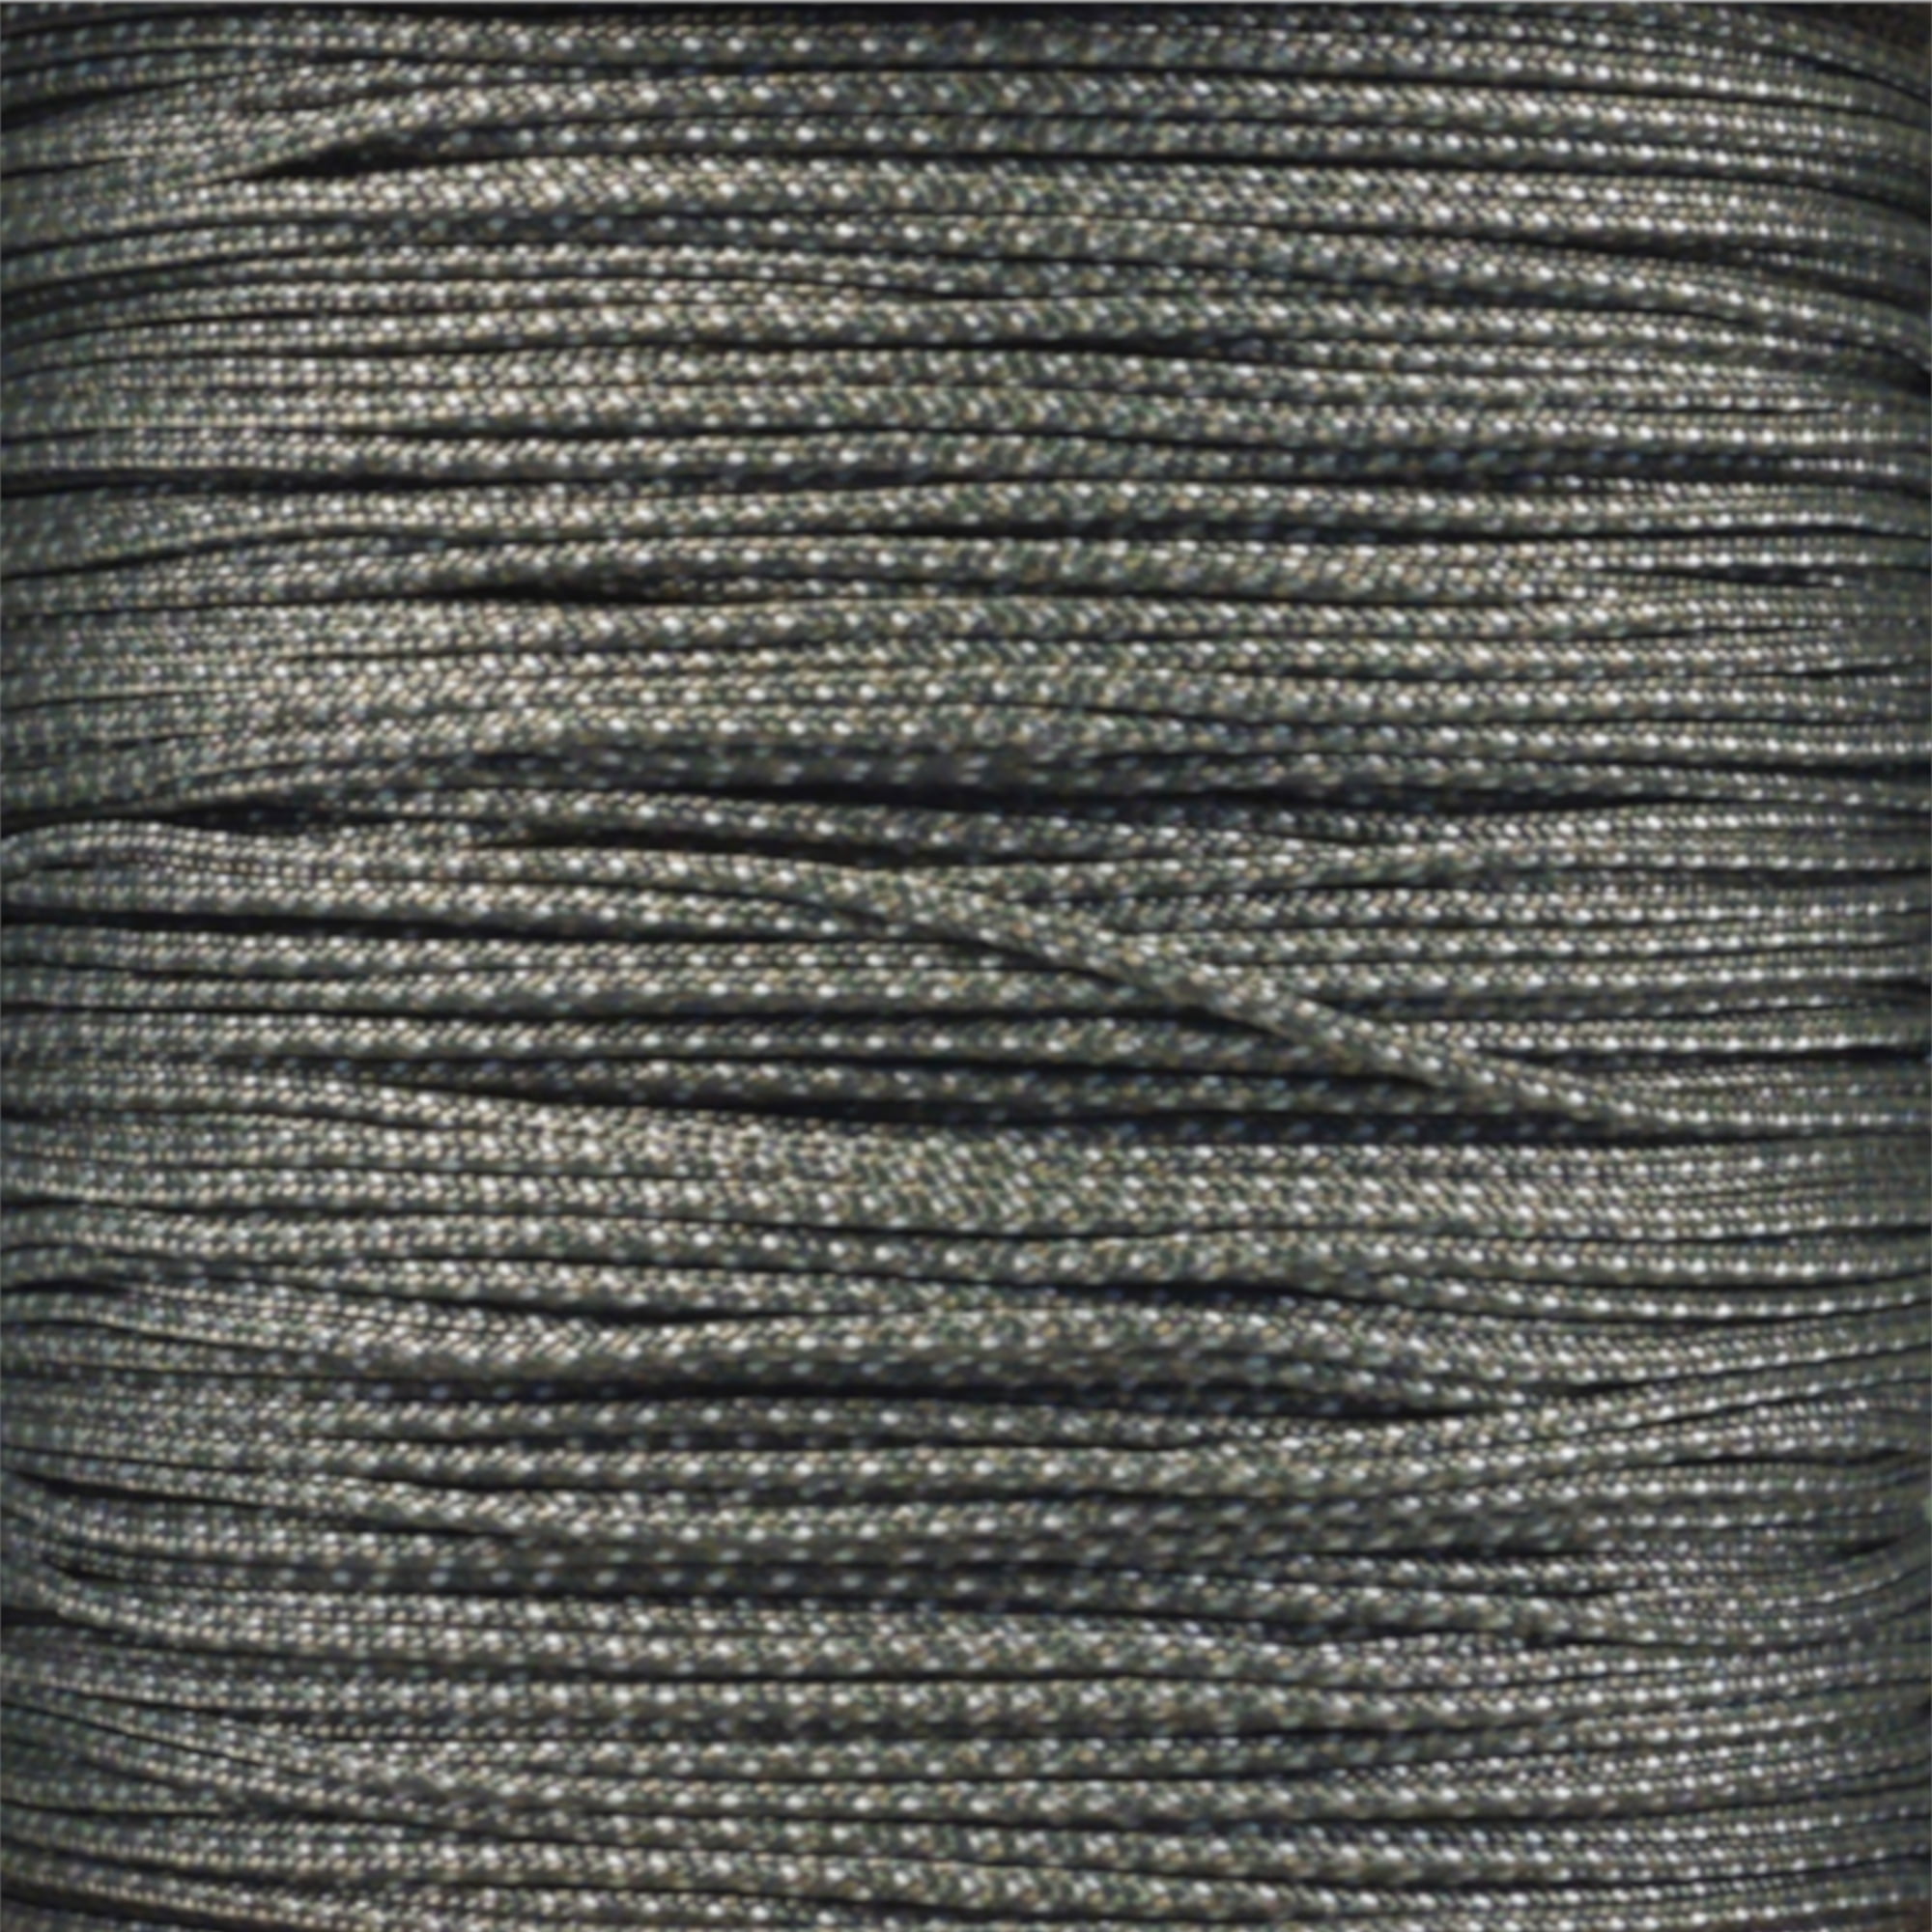 Type 1 95 Cord Paracord Black w/Silver Daimonds 100 FT USA MADE & SELLER 